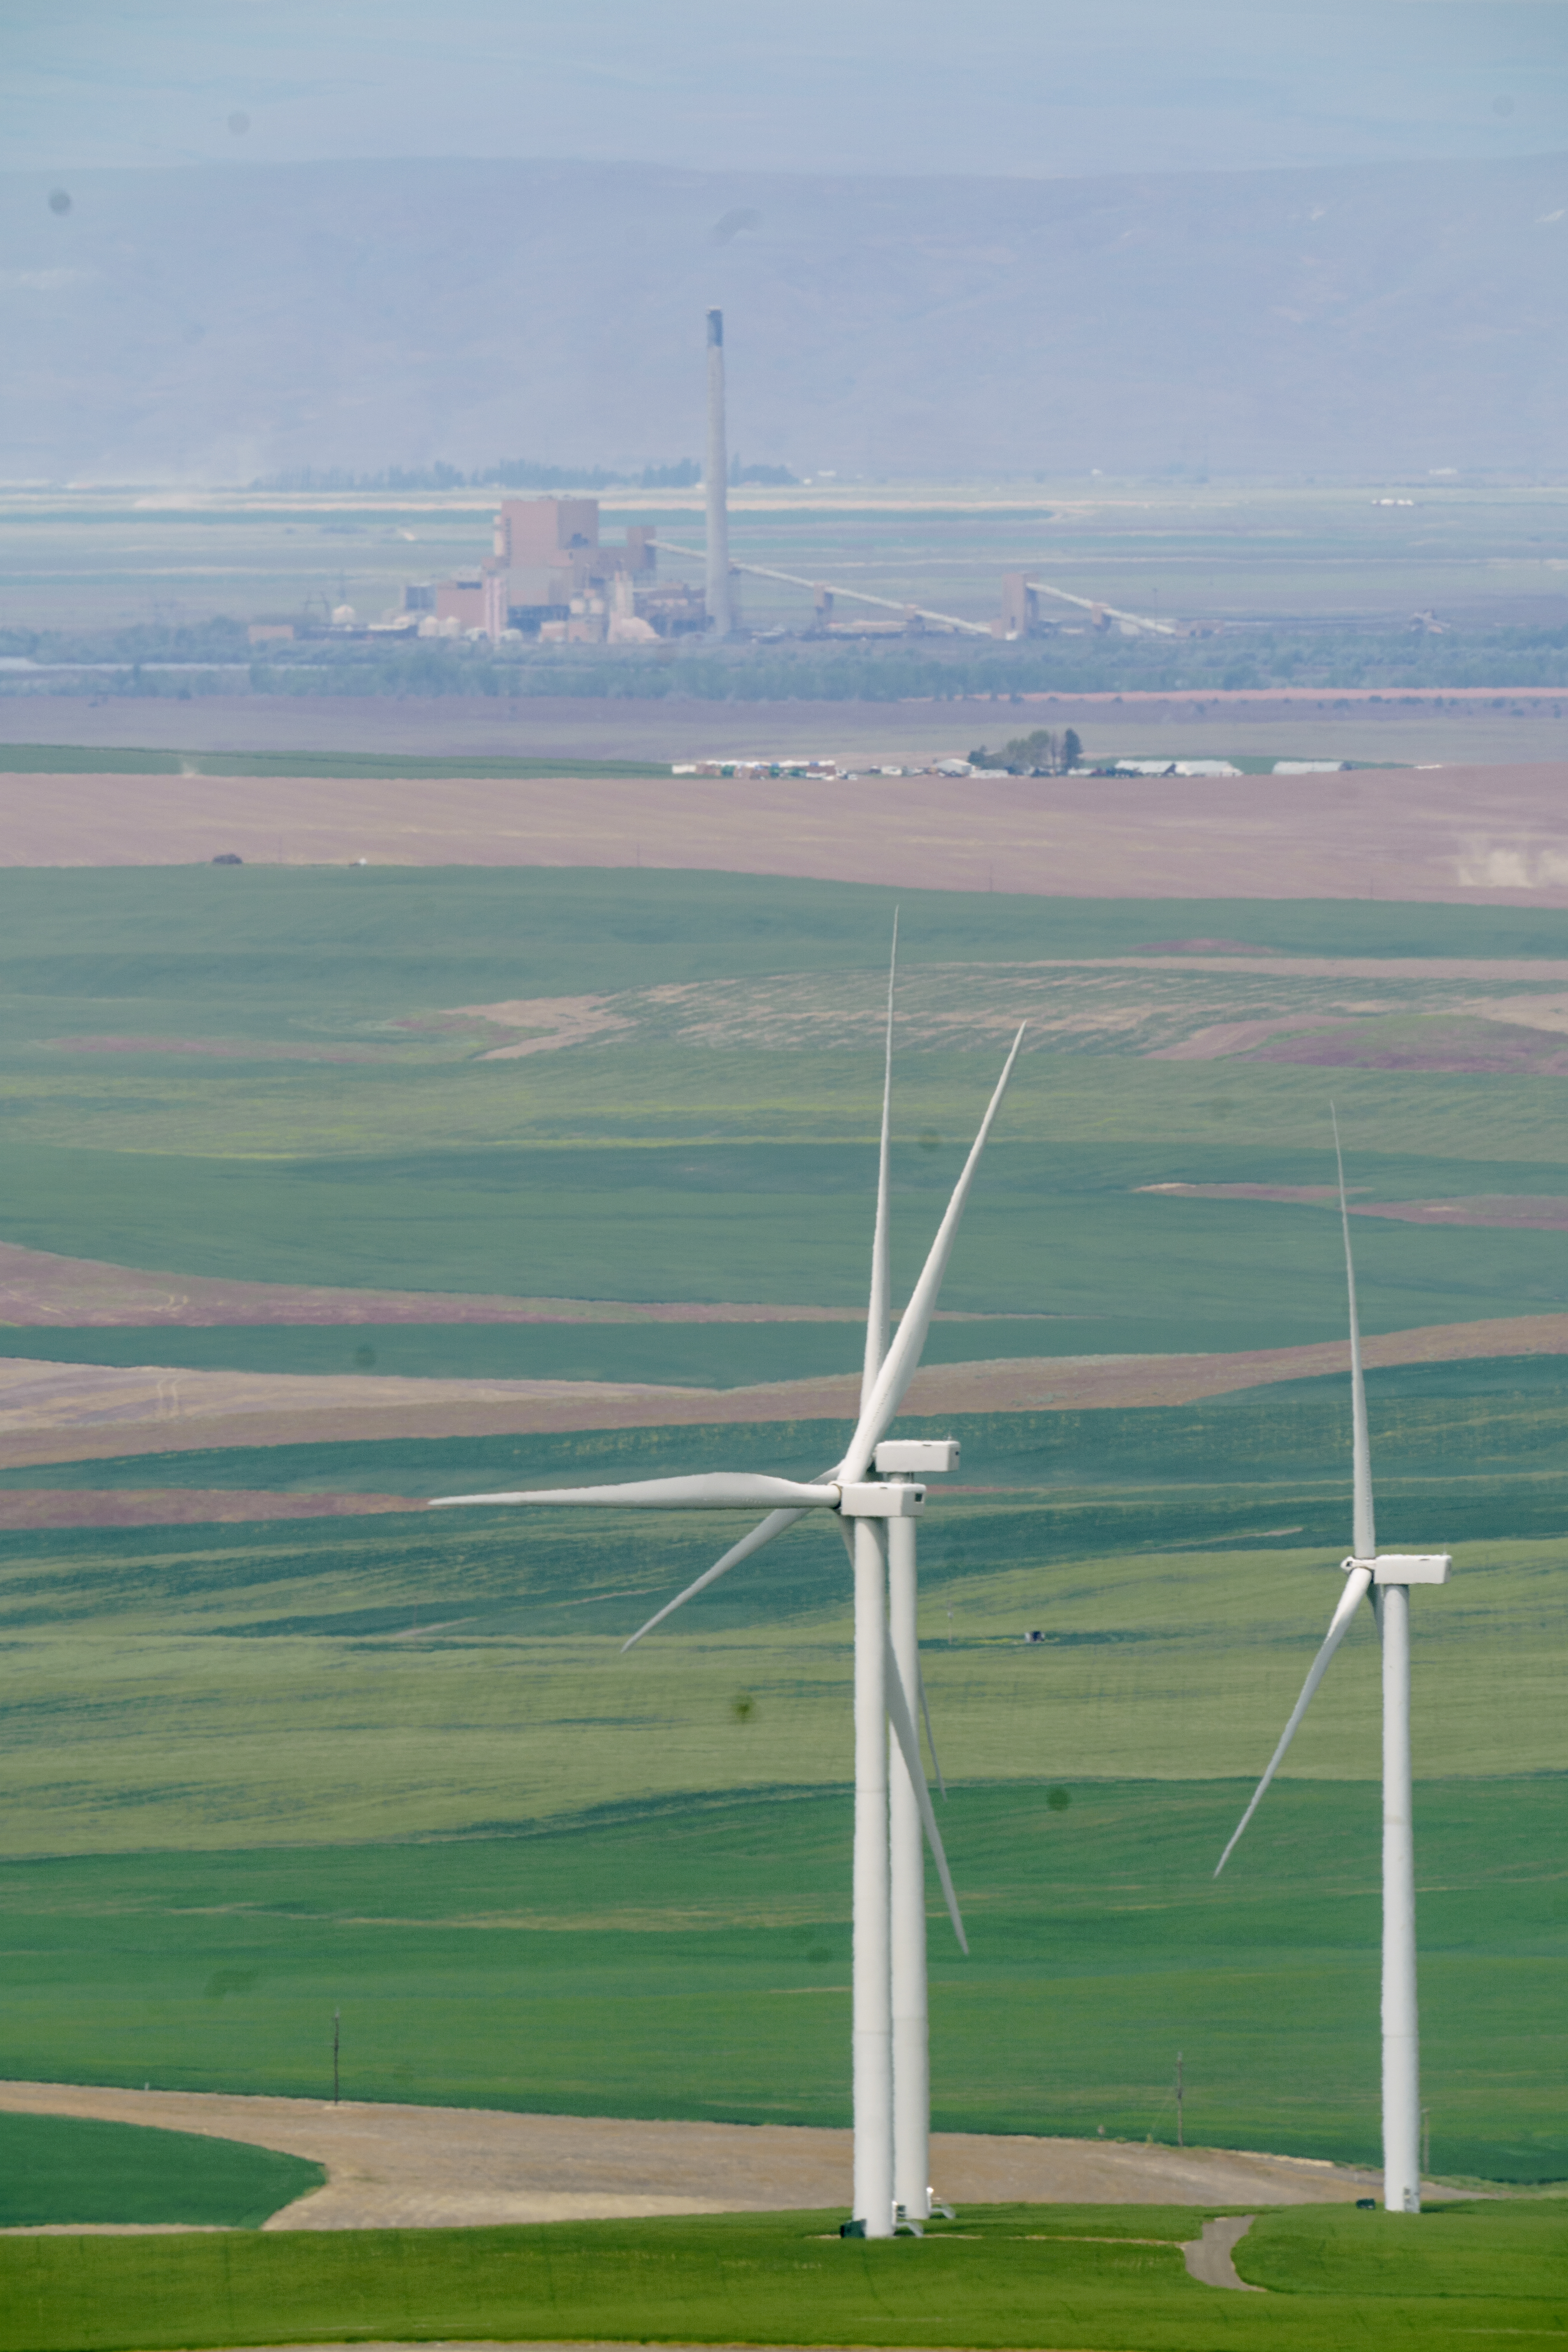 Energy produced by wind turbines and solar panels utilize some of the existing transmission lines from the former Boardman Coal Plant, top left.